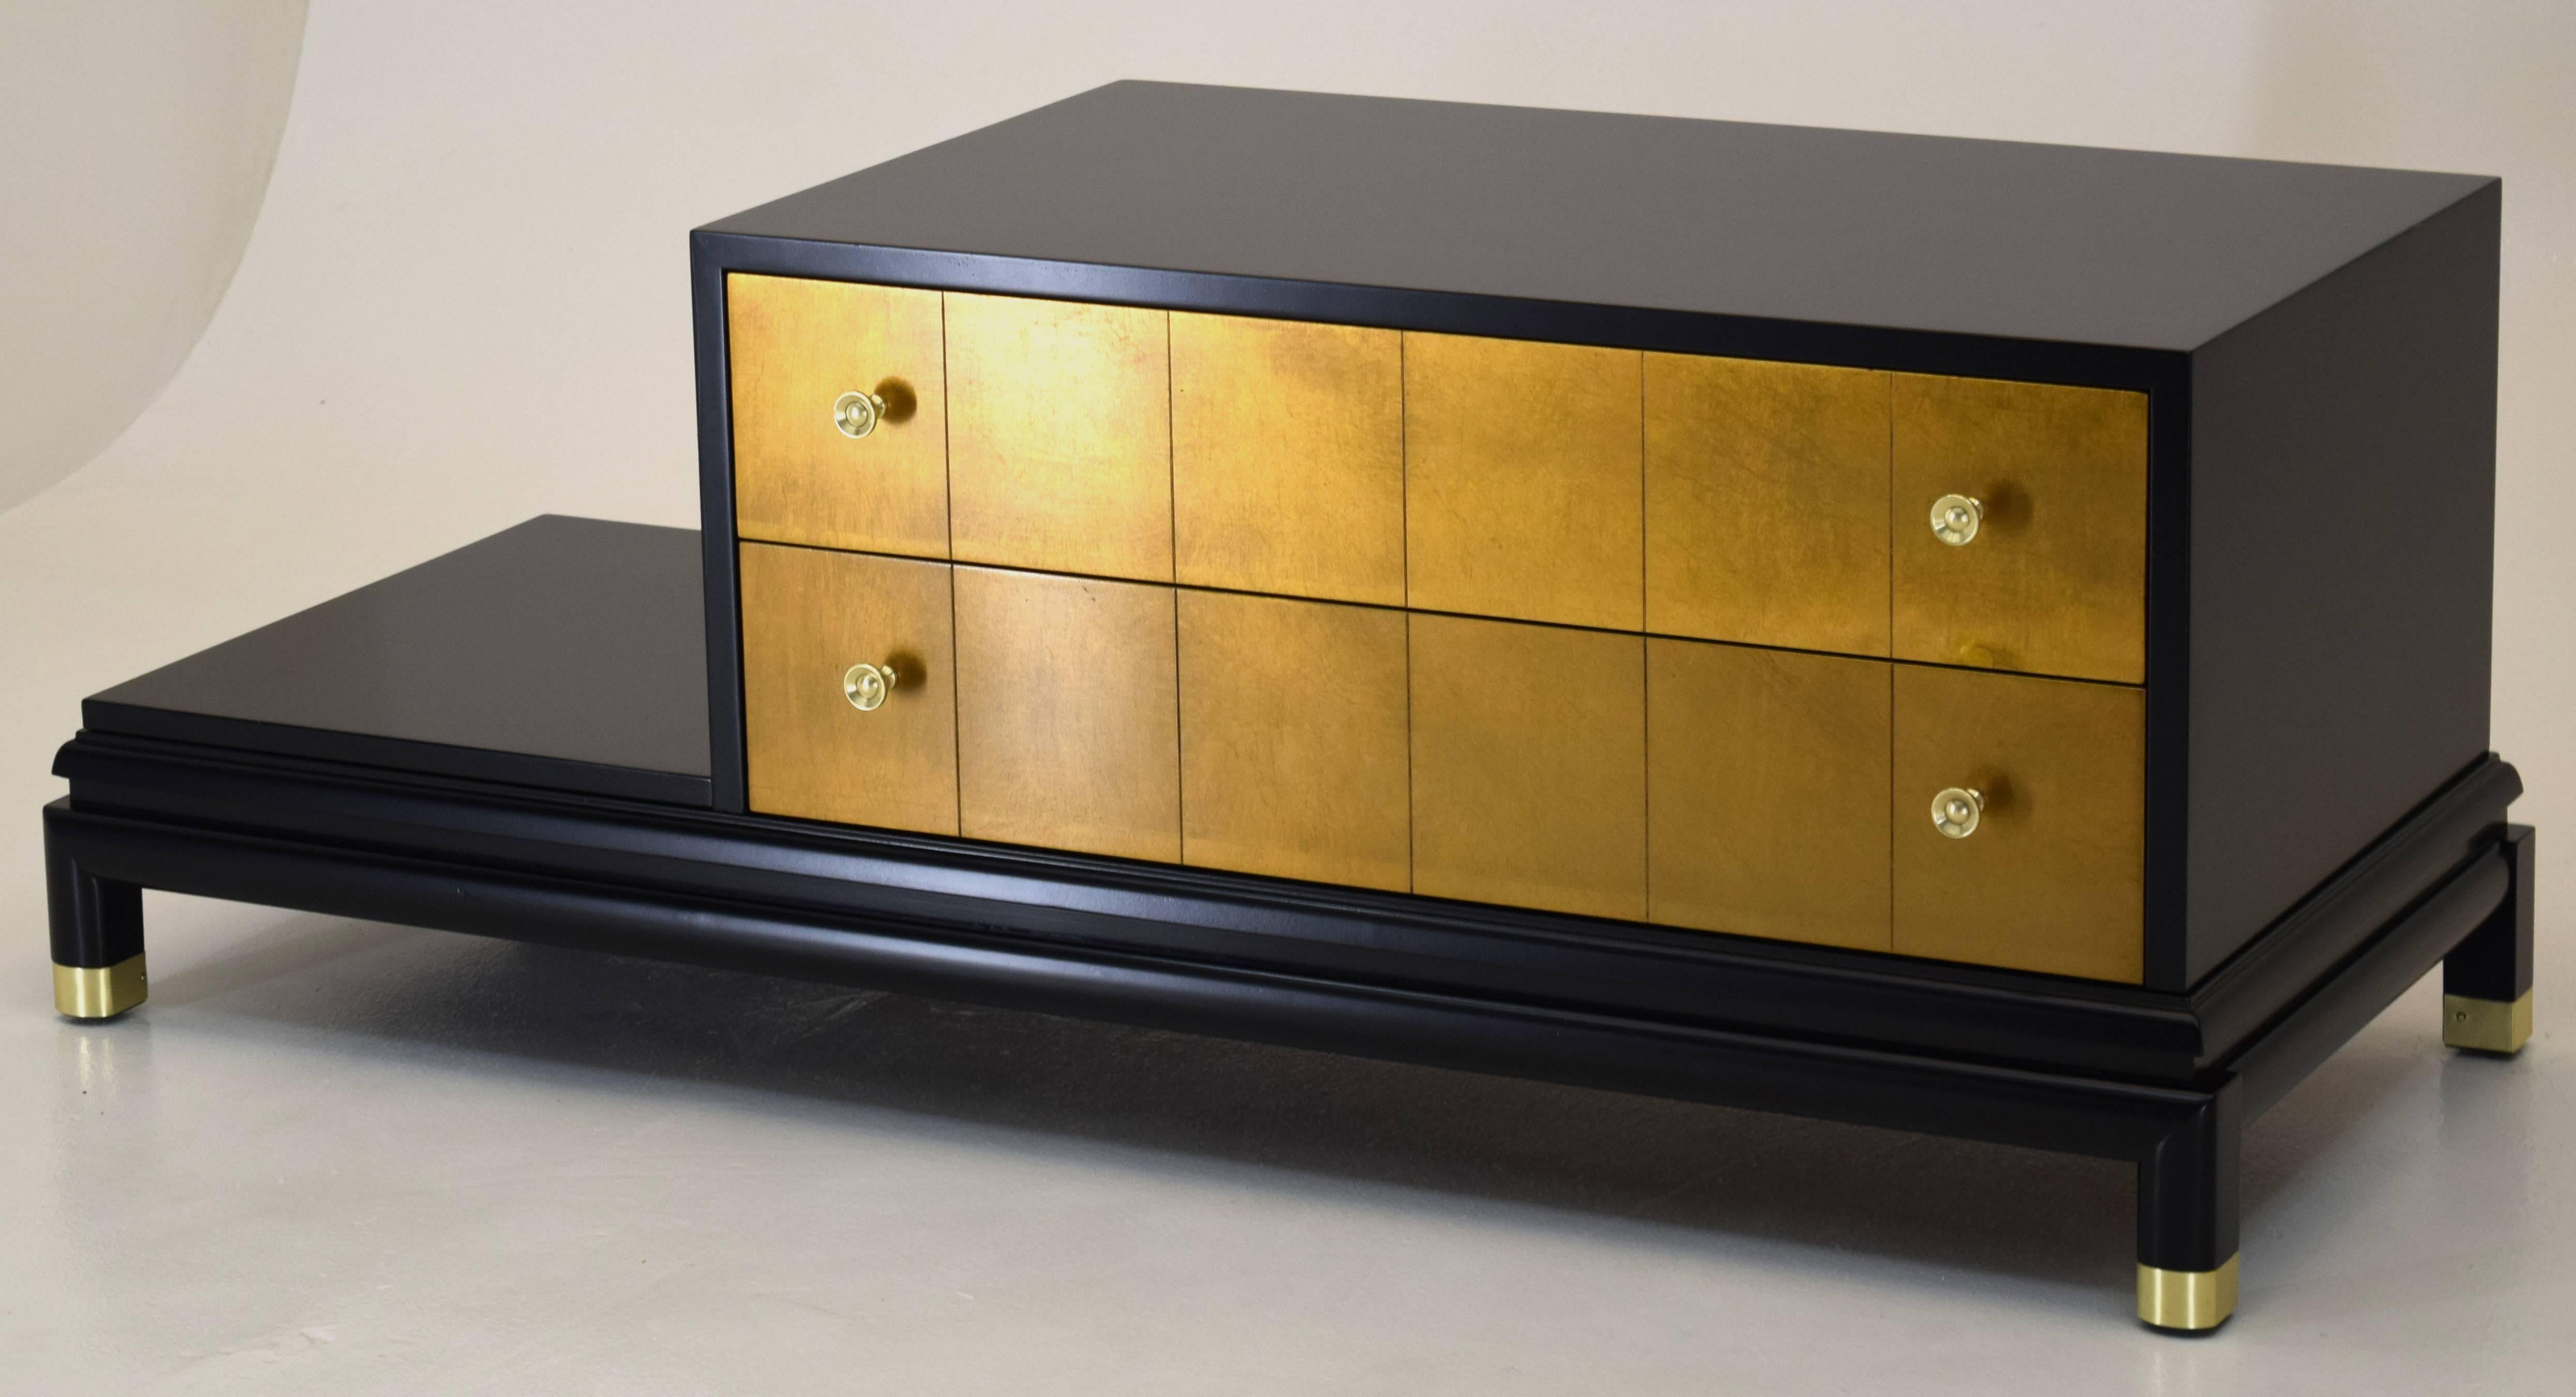 Renzo Rutili for Johnson Furniture
1950s, USA
Black lacquer, gold leaf, brass
Measures: 51 wide x 20.5 deep and 19 inches tall, lower shelf 7.25 inches.

Designed to be free standing in a room likely with chairs either side, these two-tier (or